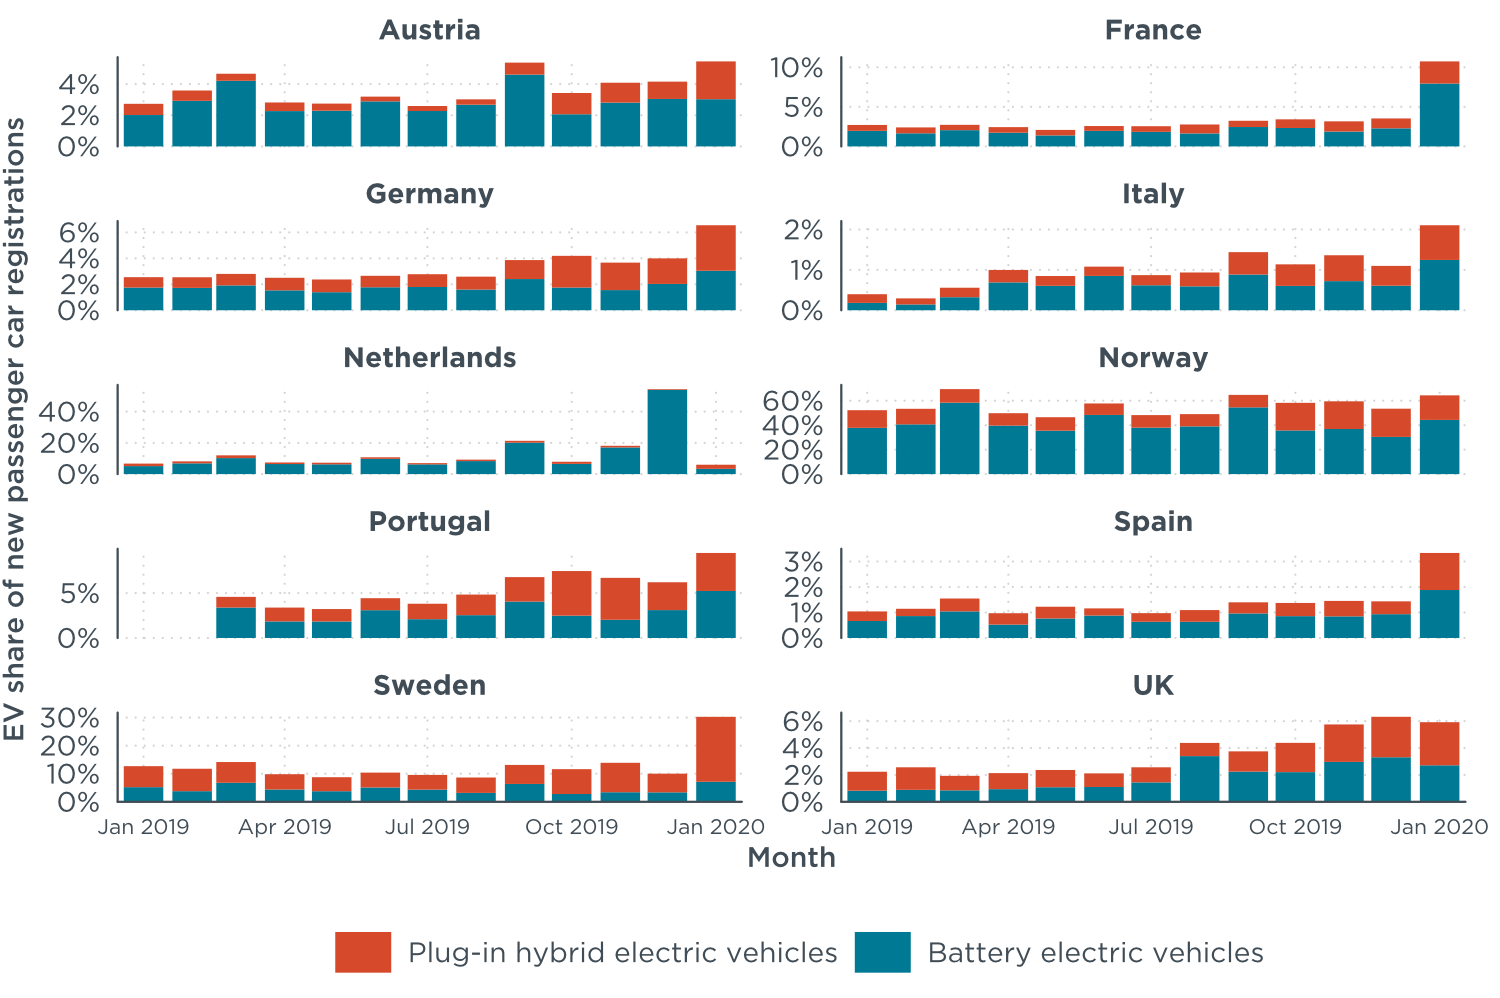 Figure: Electric vehicle share of new passenger car registrations in select countries, January 2019 to January 2020